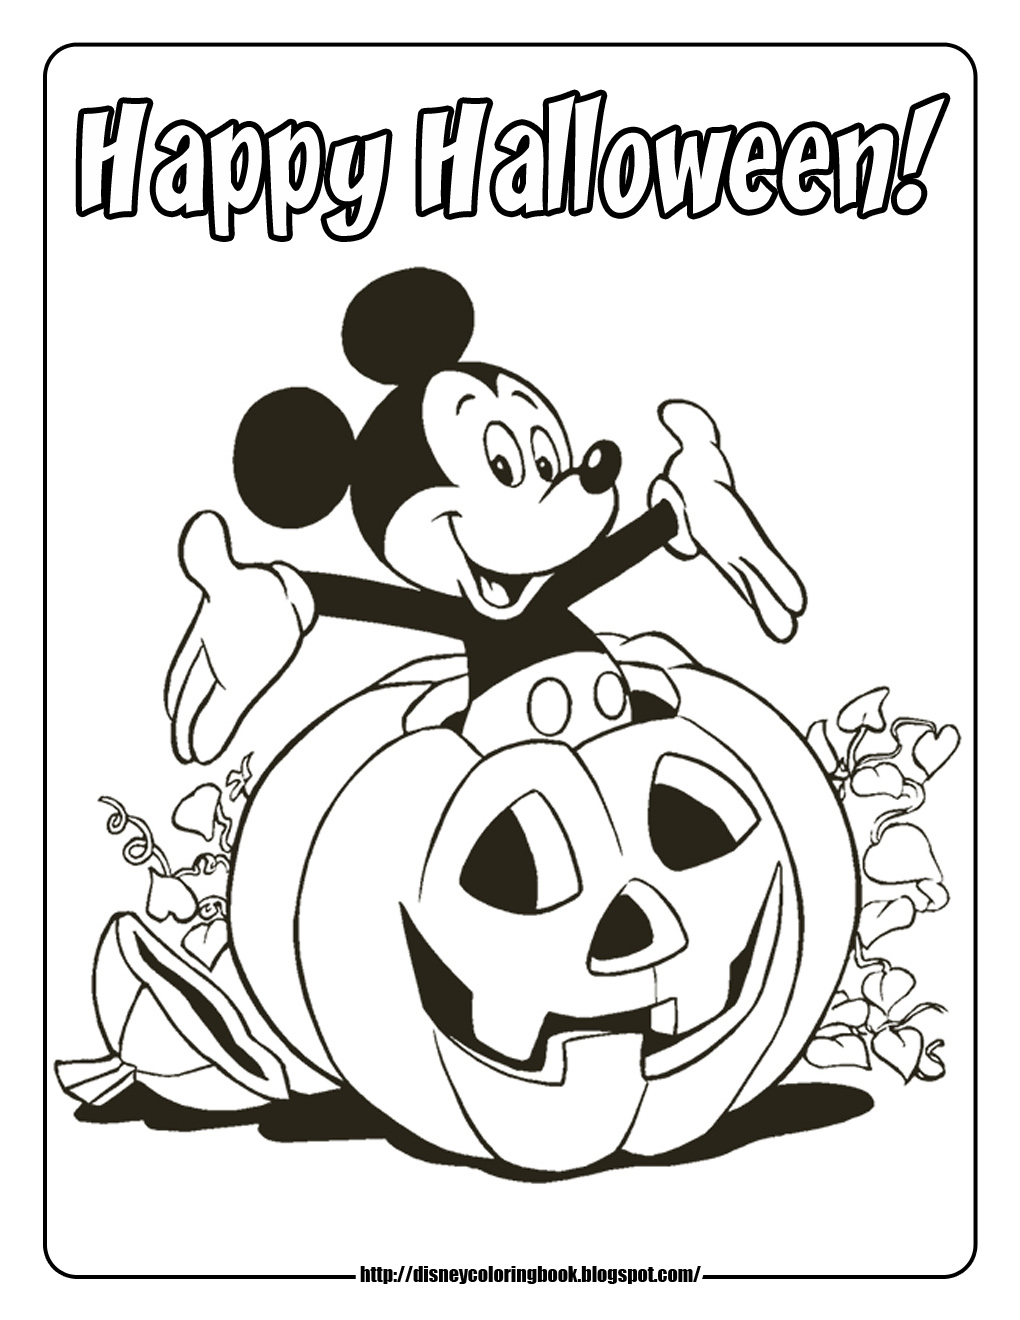 Disney Coloring Pages and Sheets for Kids: Mickey and Friends Halloween